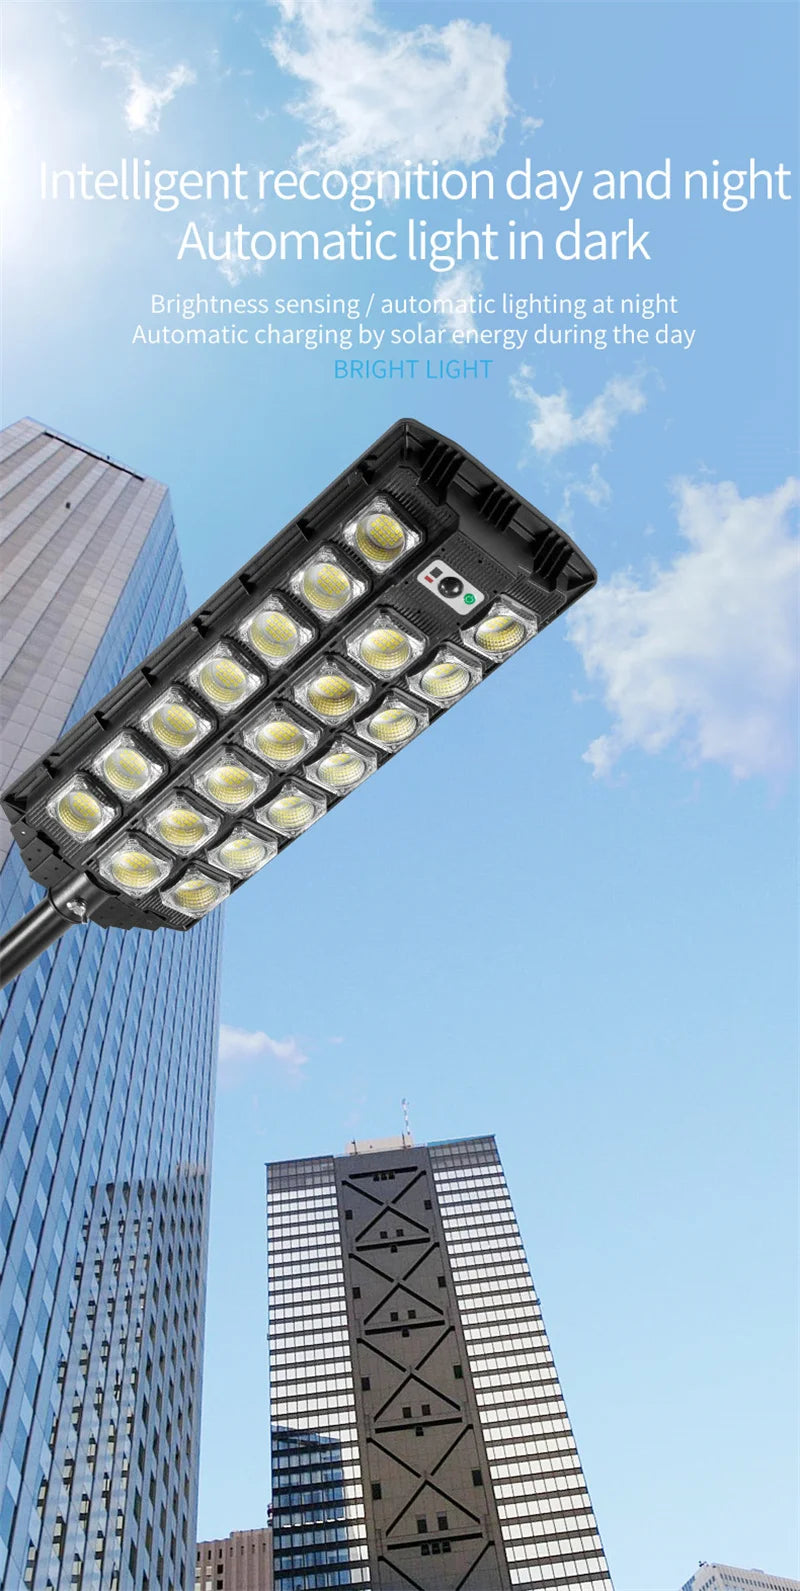 15000LM Solar Street Light, Smart solar-powered street light that turns on at dusk, brightens in darkness, and recharges during daylight.